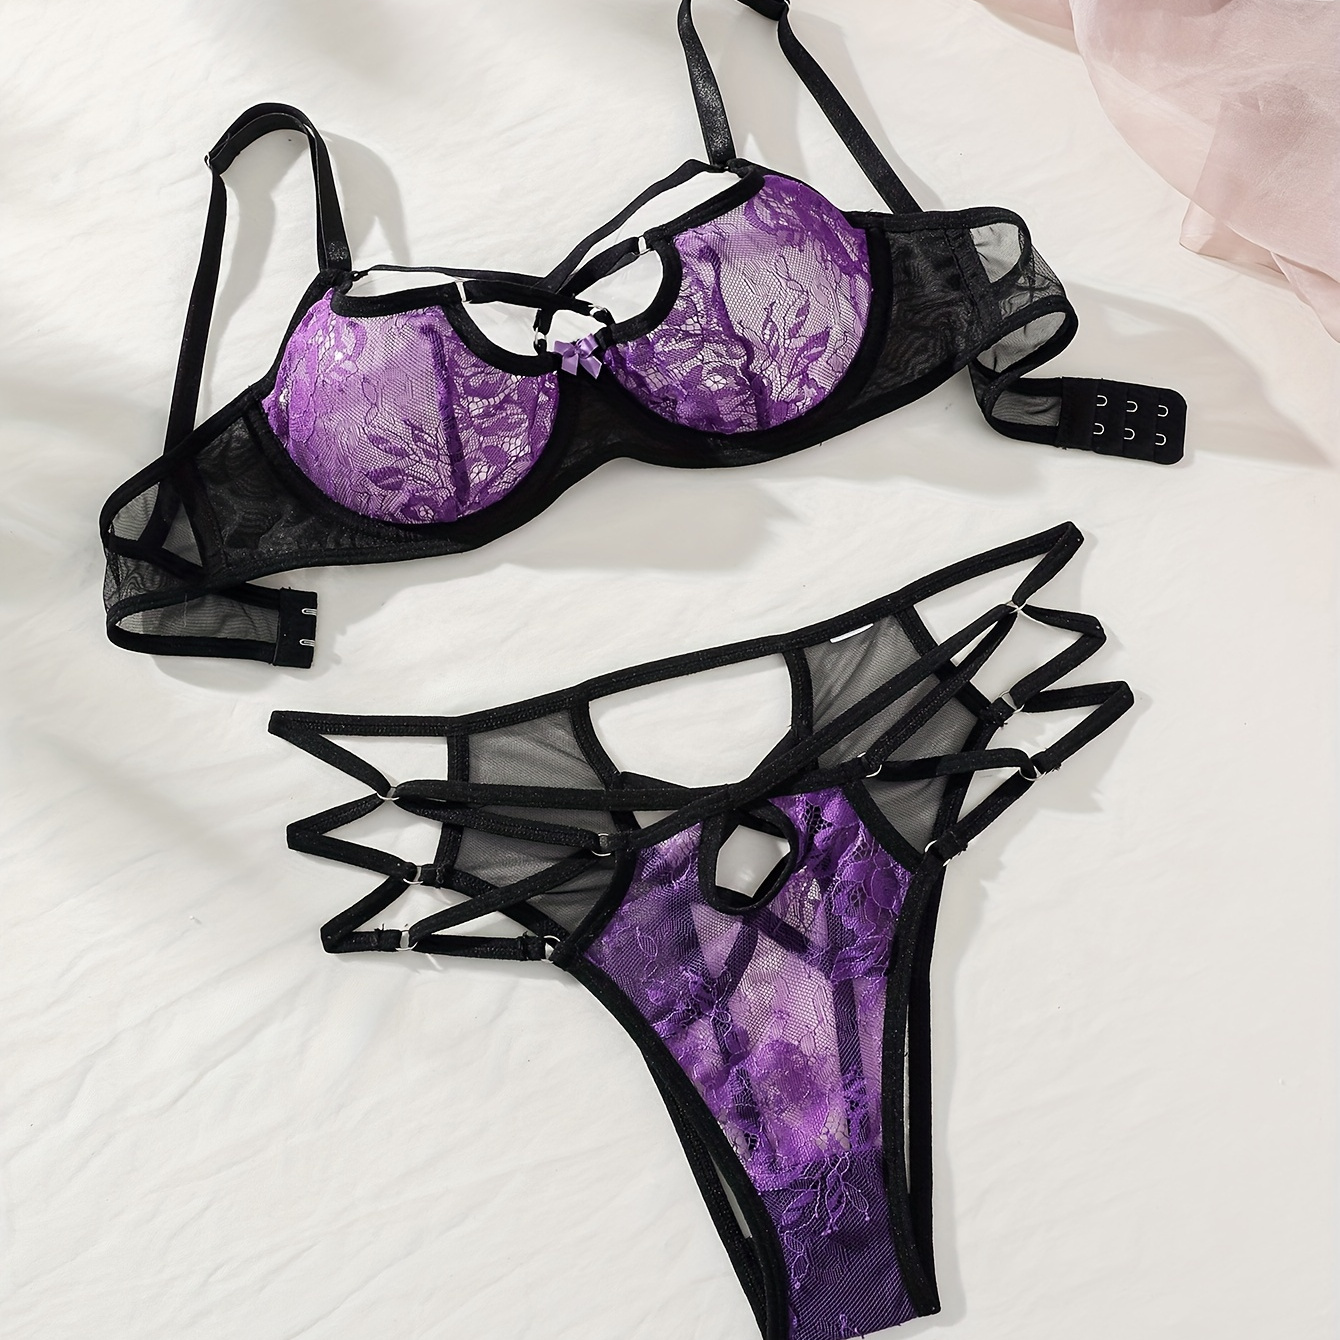 

Women's 2-piece Lingerie Set, Purple Lace Sexy Push-up Bra And Panties, Anti-sagging Underwire Bra, Petite To Plus Size, Strappy Detail